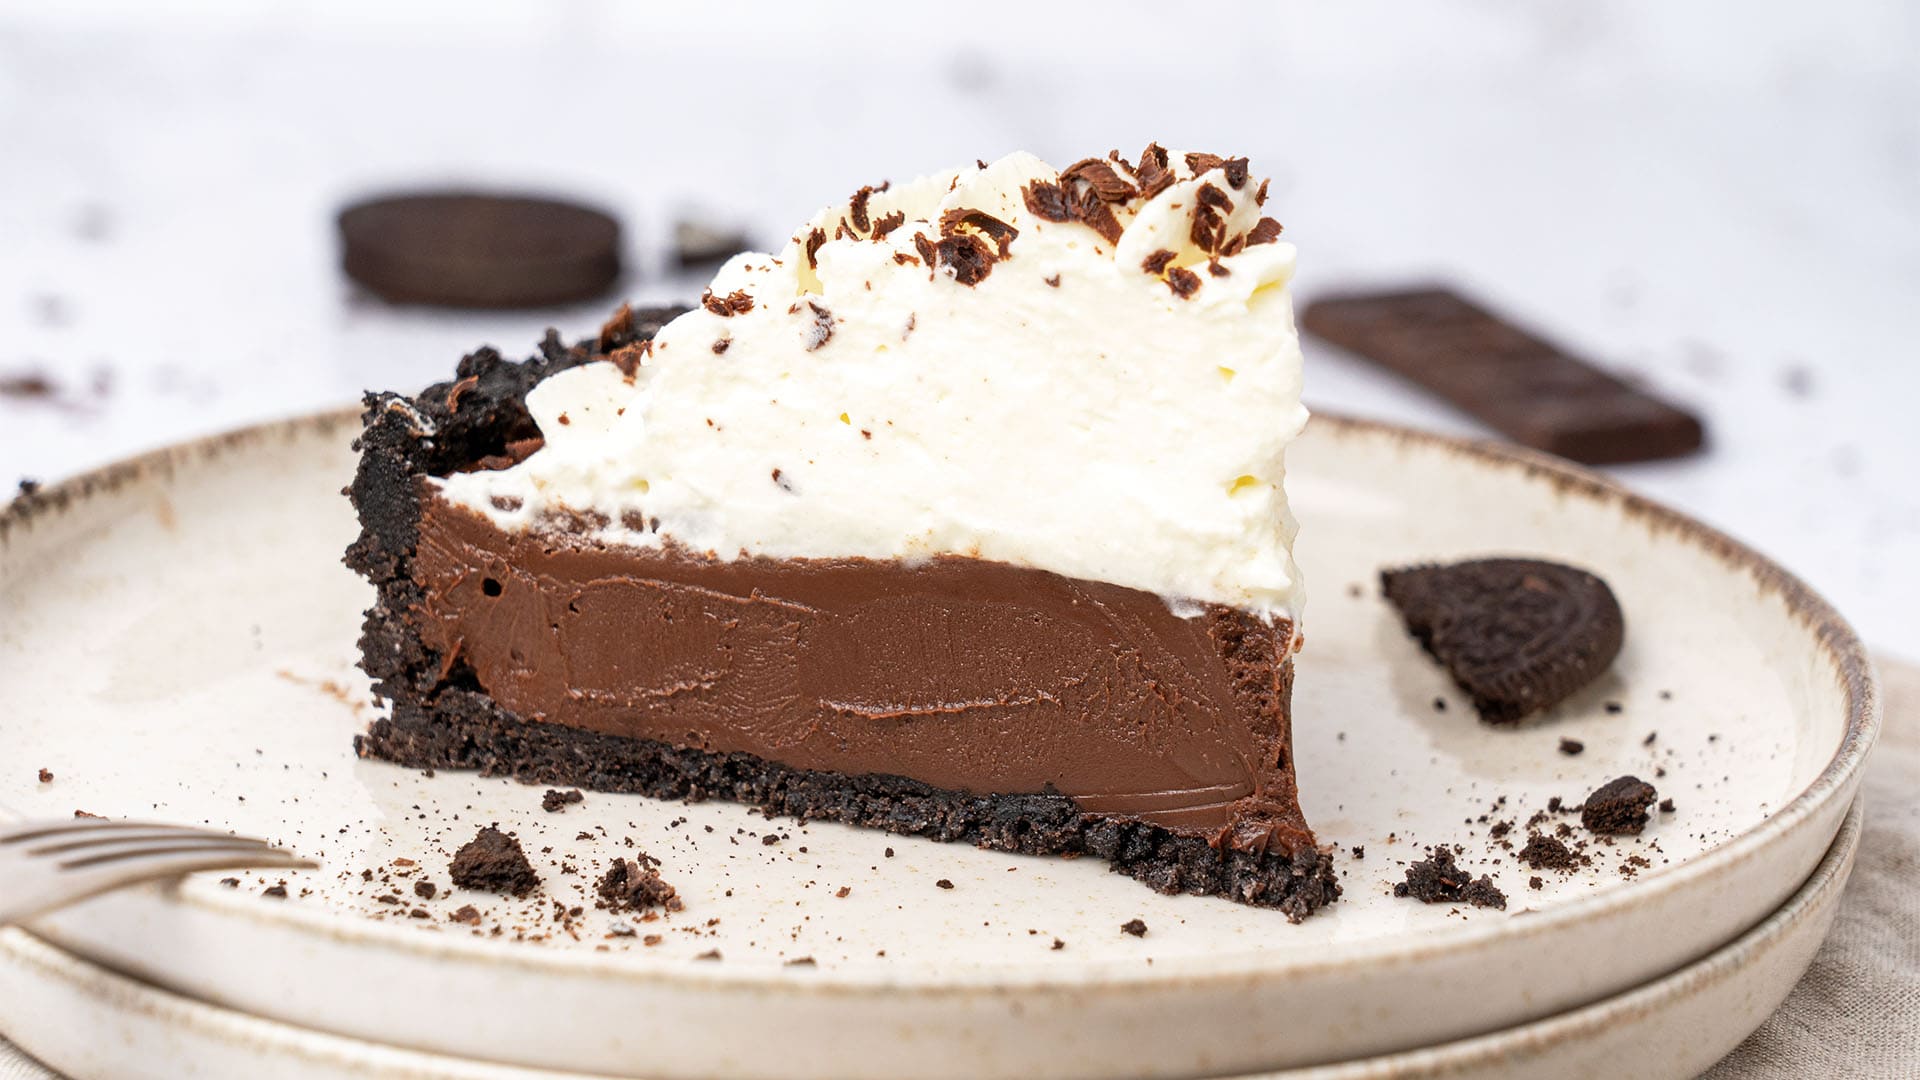 a slice of No-bake chocolate pie with chantilly cream.